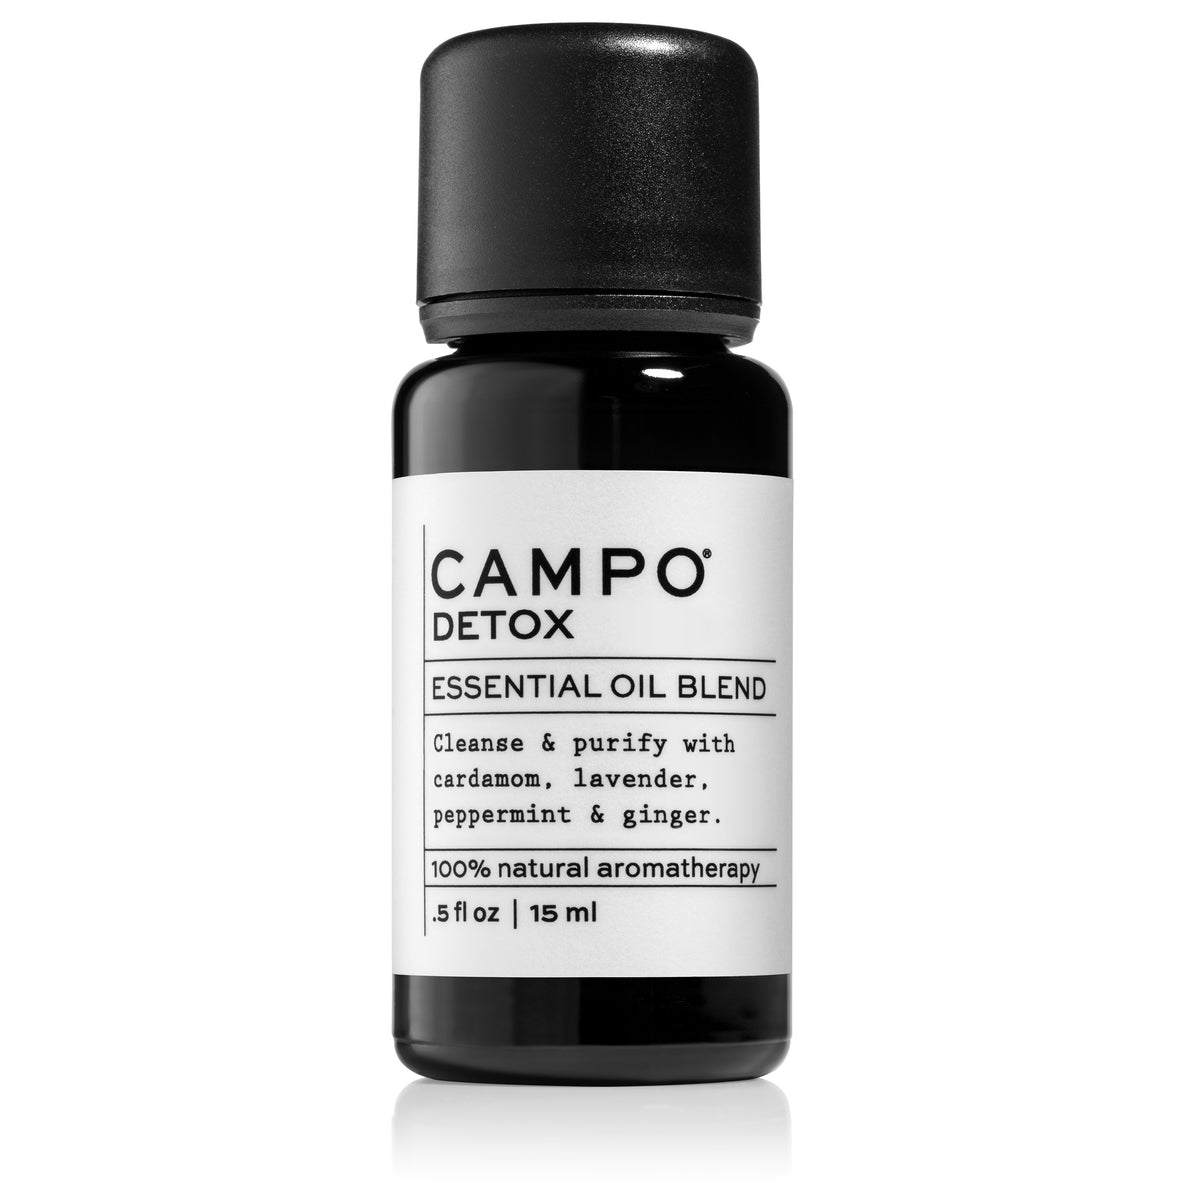 Campo Beauty DETOX Blend 15 ml Essential Oil. Help eliminate toxins naturally with this 100% natural essential oil blend of Cardamom, Lavender, Peppermint &amp; Ginger.